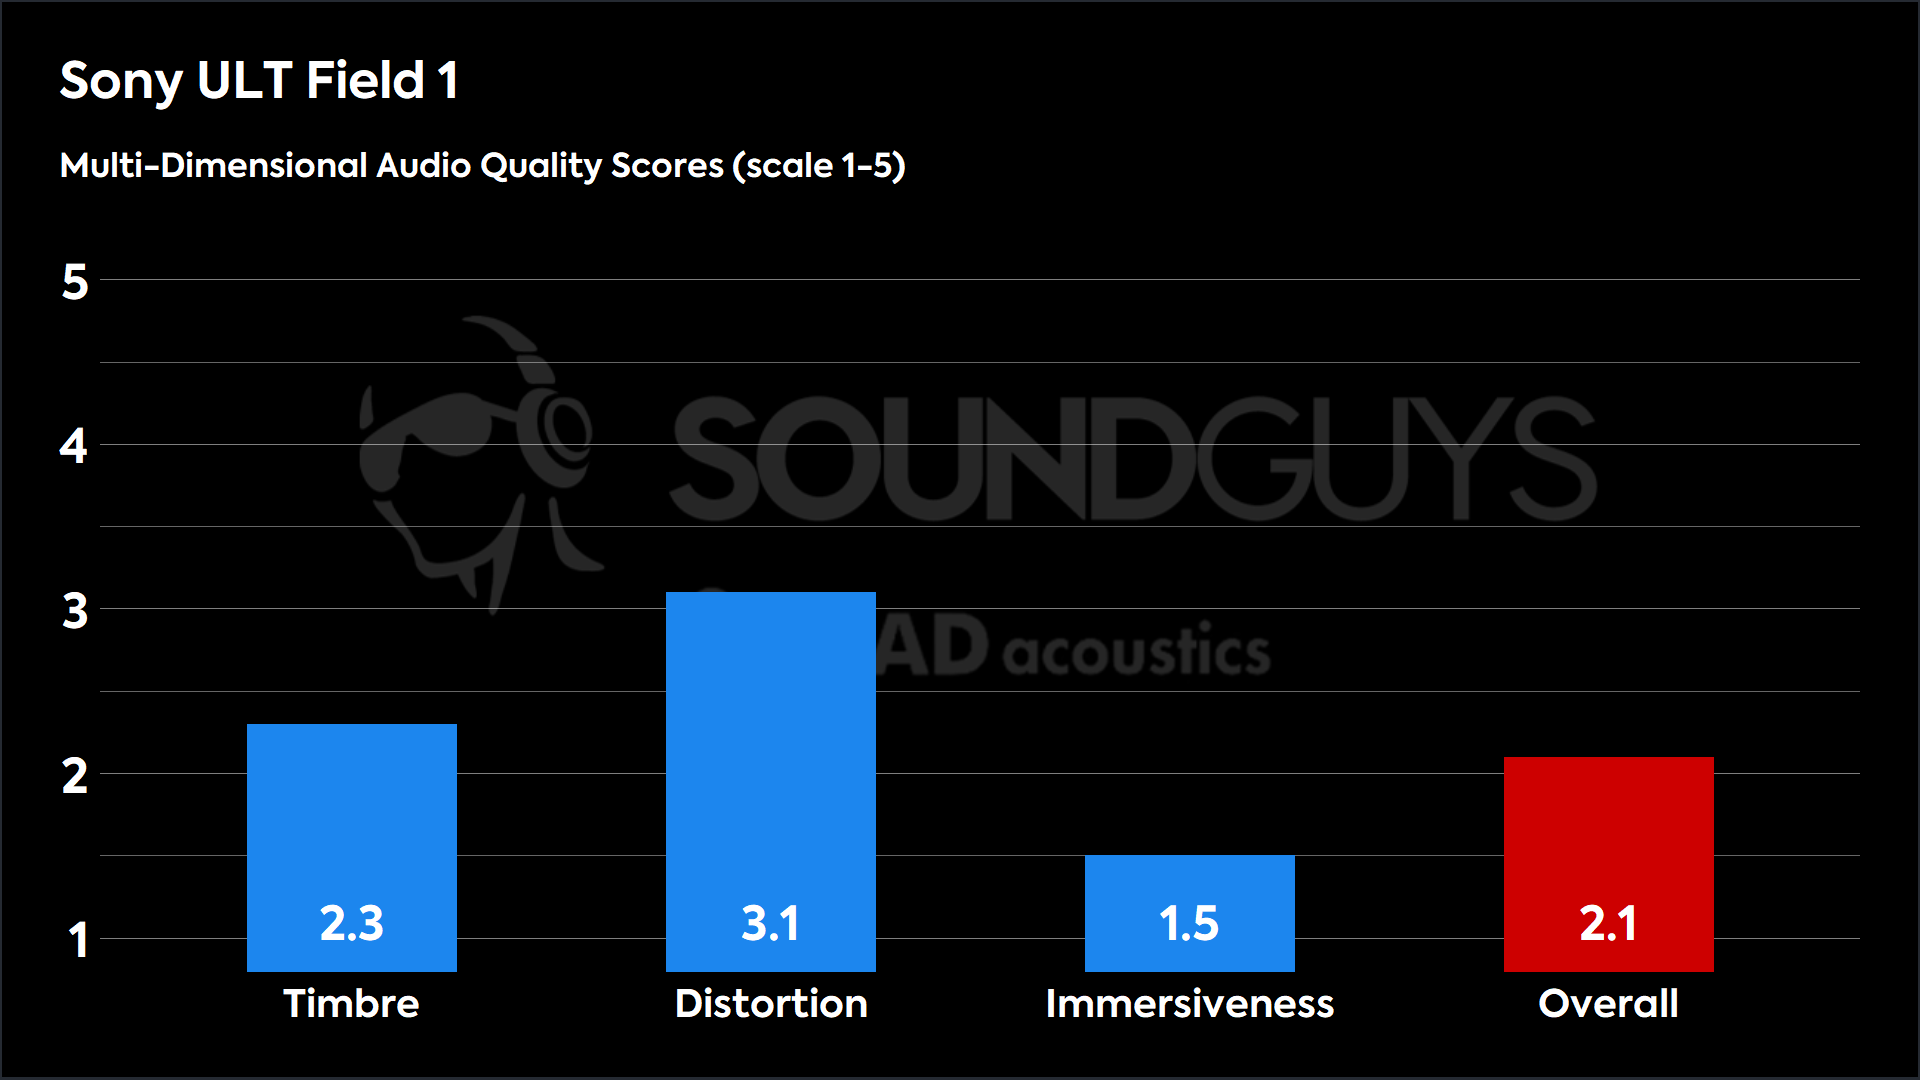 This chart shows the MDAQS results for the Sony ULT Field 1 in Default mode. The Timbre score is 2.3, The Distortion score is 3.1, the Immersiveness score is 1.5, and the Overall Score is 2.1).